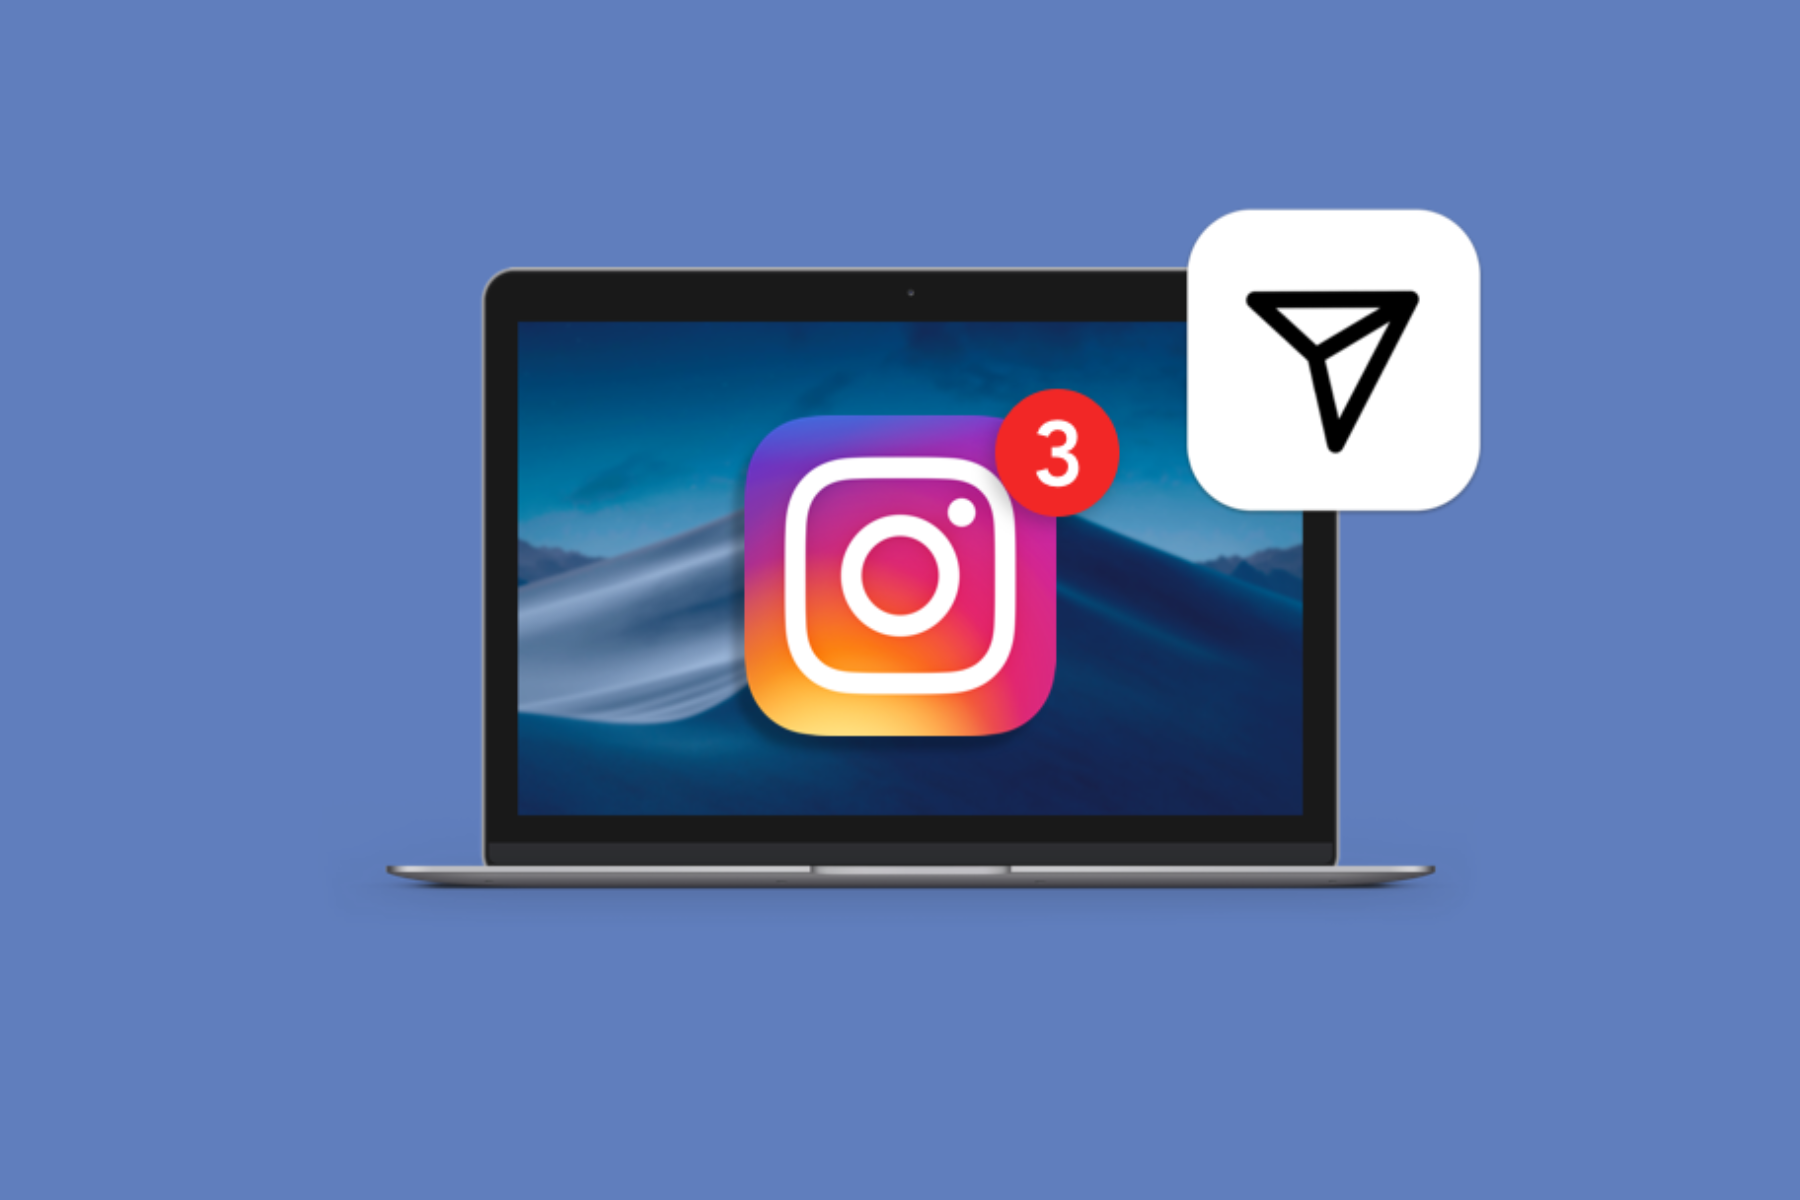 A laptop featuring the Instagram and DM logos